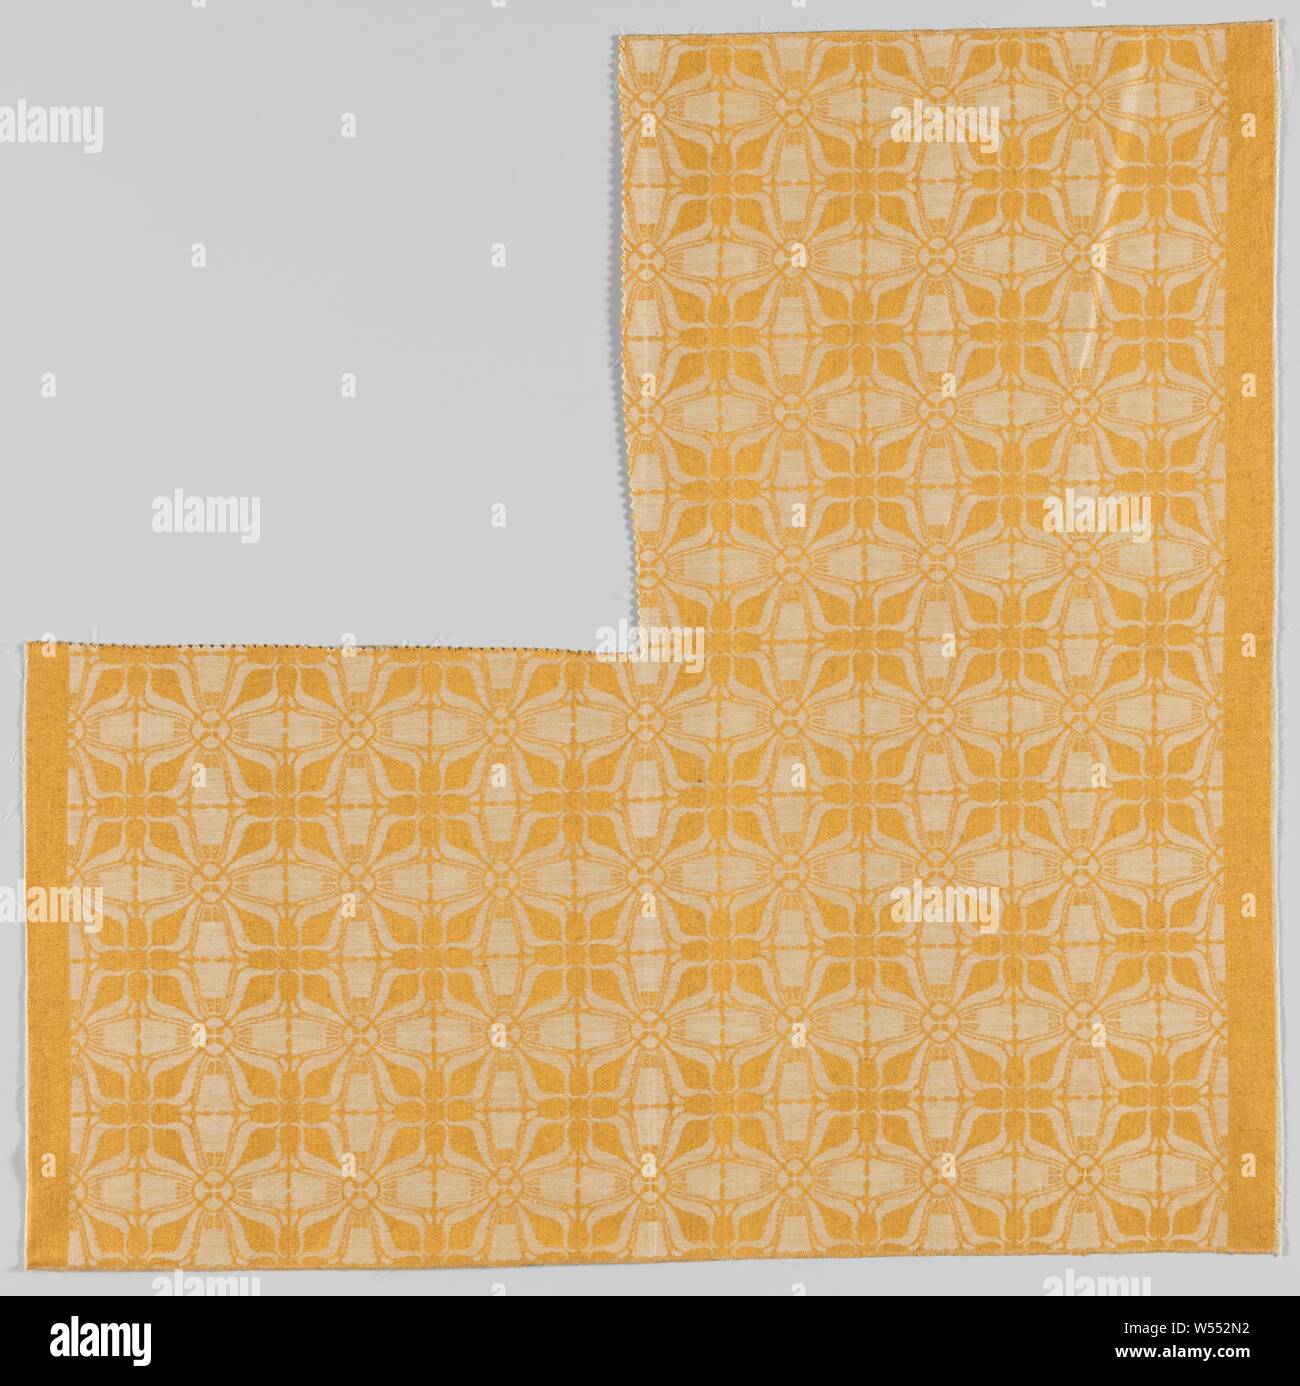 Steel canvas made of linen damask with floral motif, Steel canvas made of linen damask with stylized floral pattern in natural on a golden-yellow background., Chris Lebeau, Eindhoven, 1911 - 1915, linen (material), damask, h 57.2 cm × w 58.5 cm Stock Photo